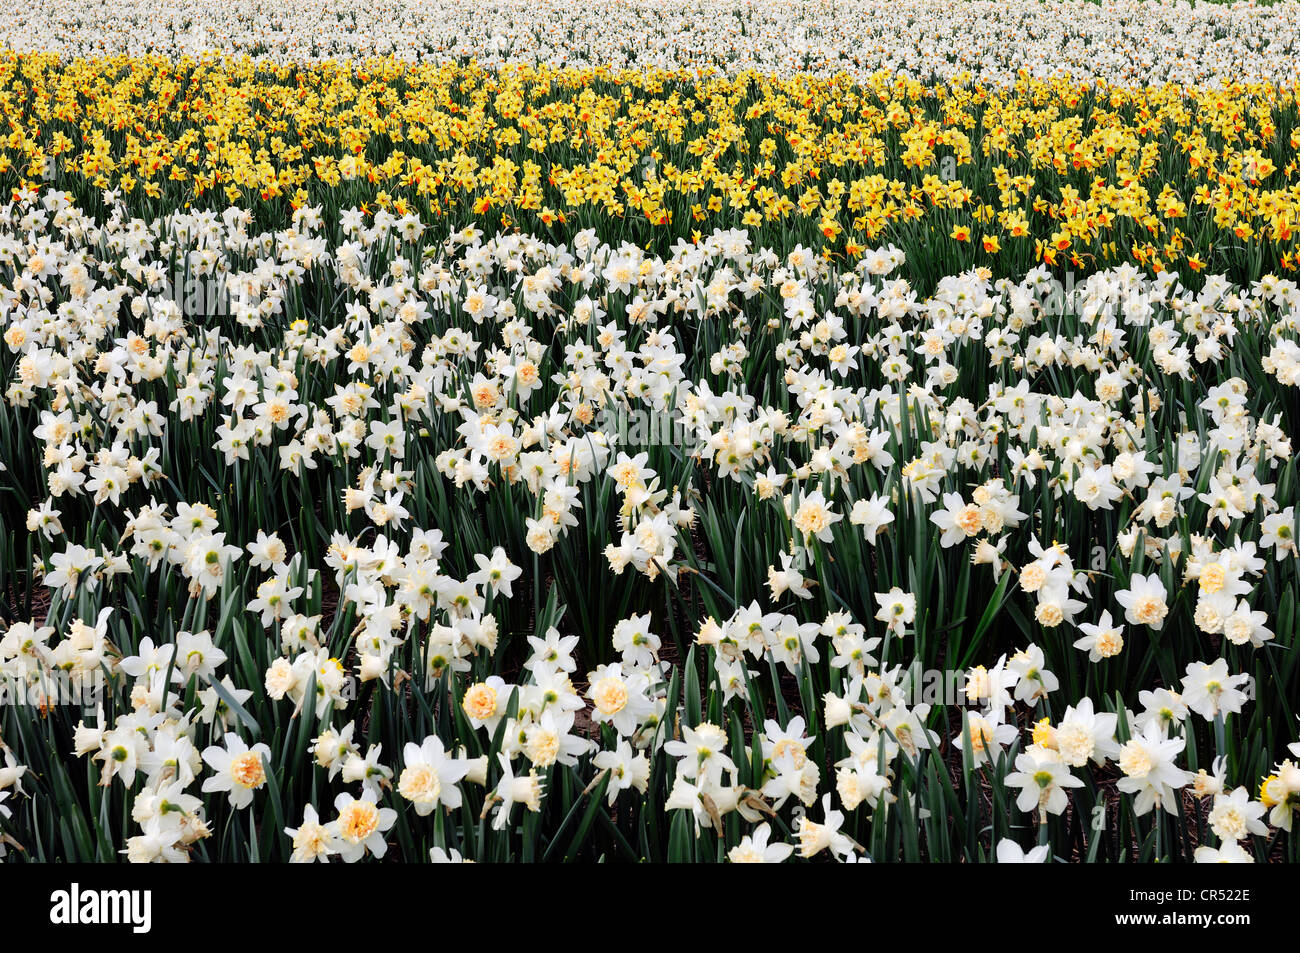 Field of Daffodils (Narcissus sp.), Lisse, South Holland, Holland, Netherlands, Europe Stock Photo